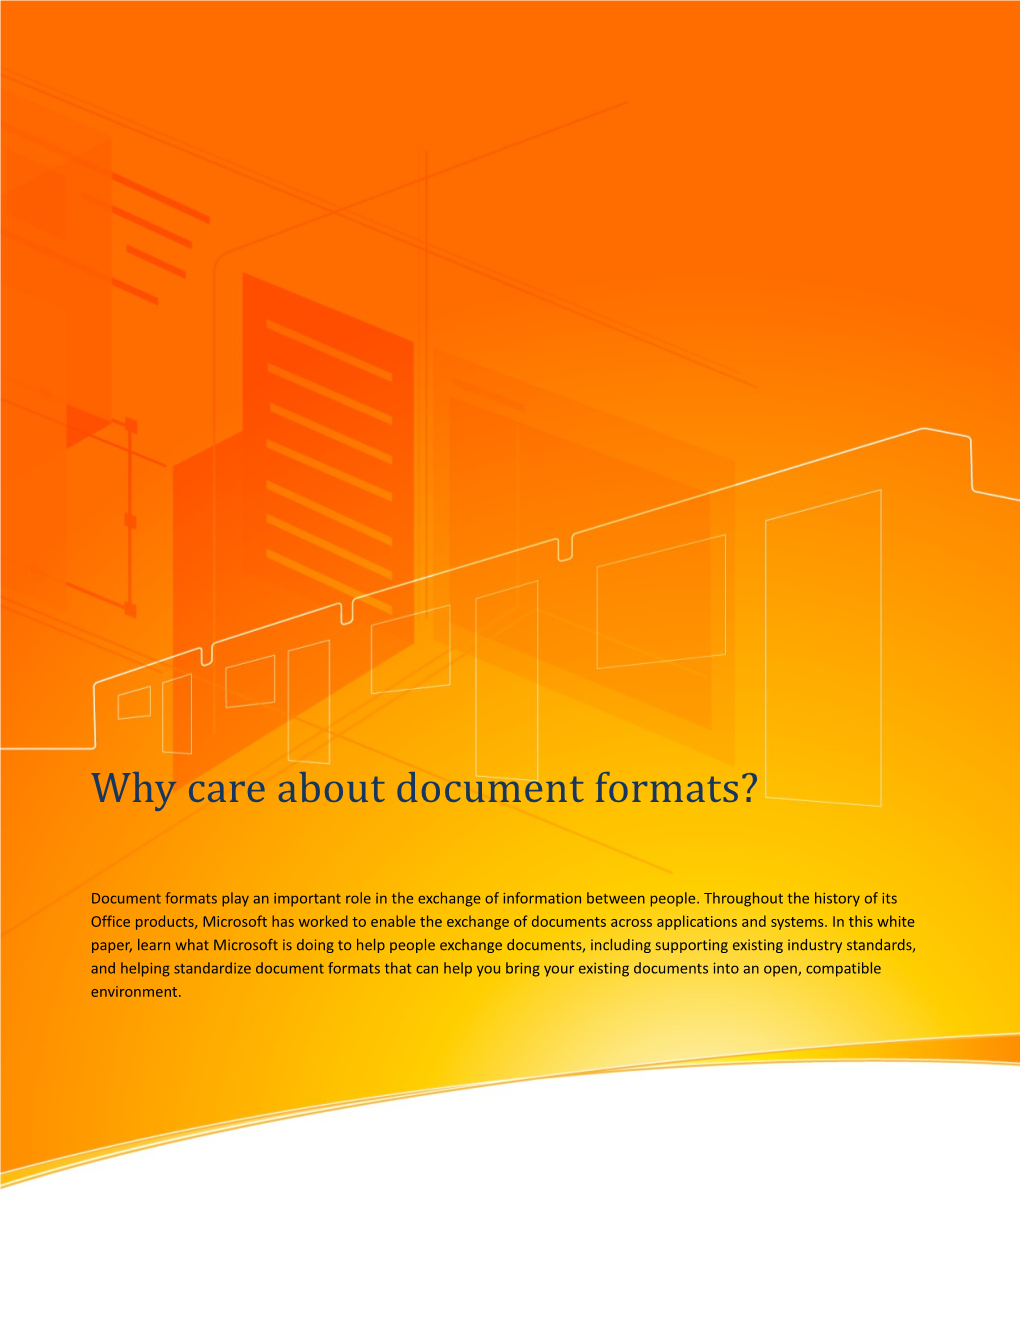 Why Care About Document Formats?